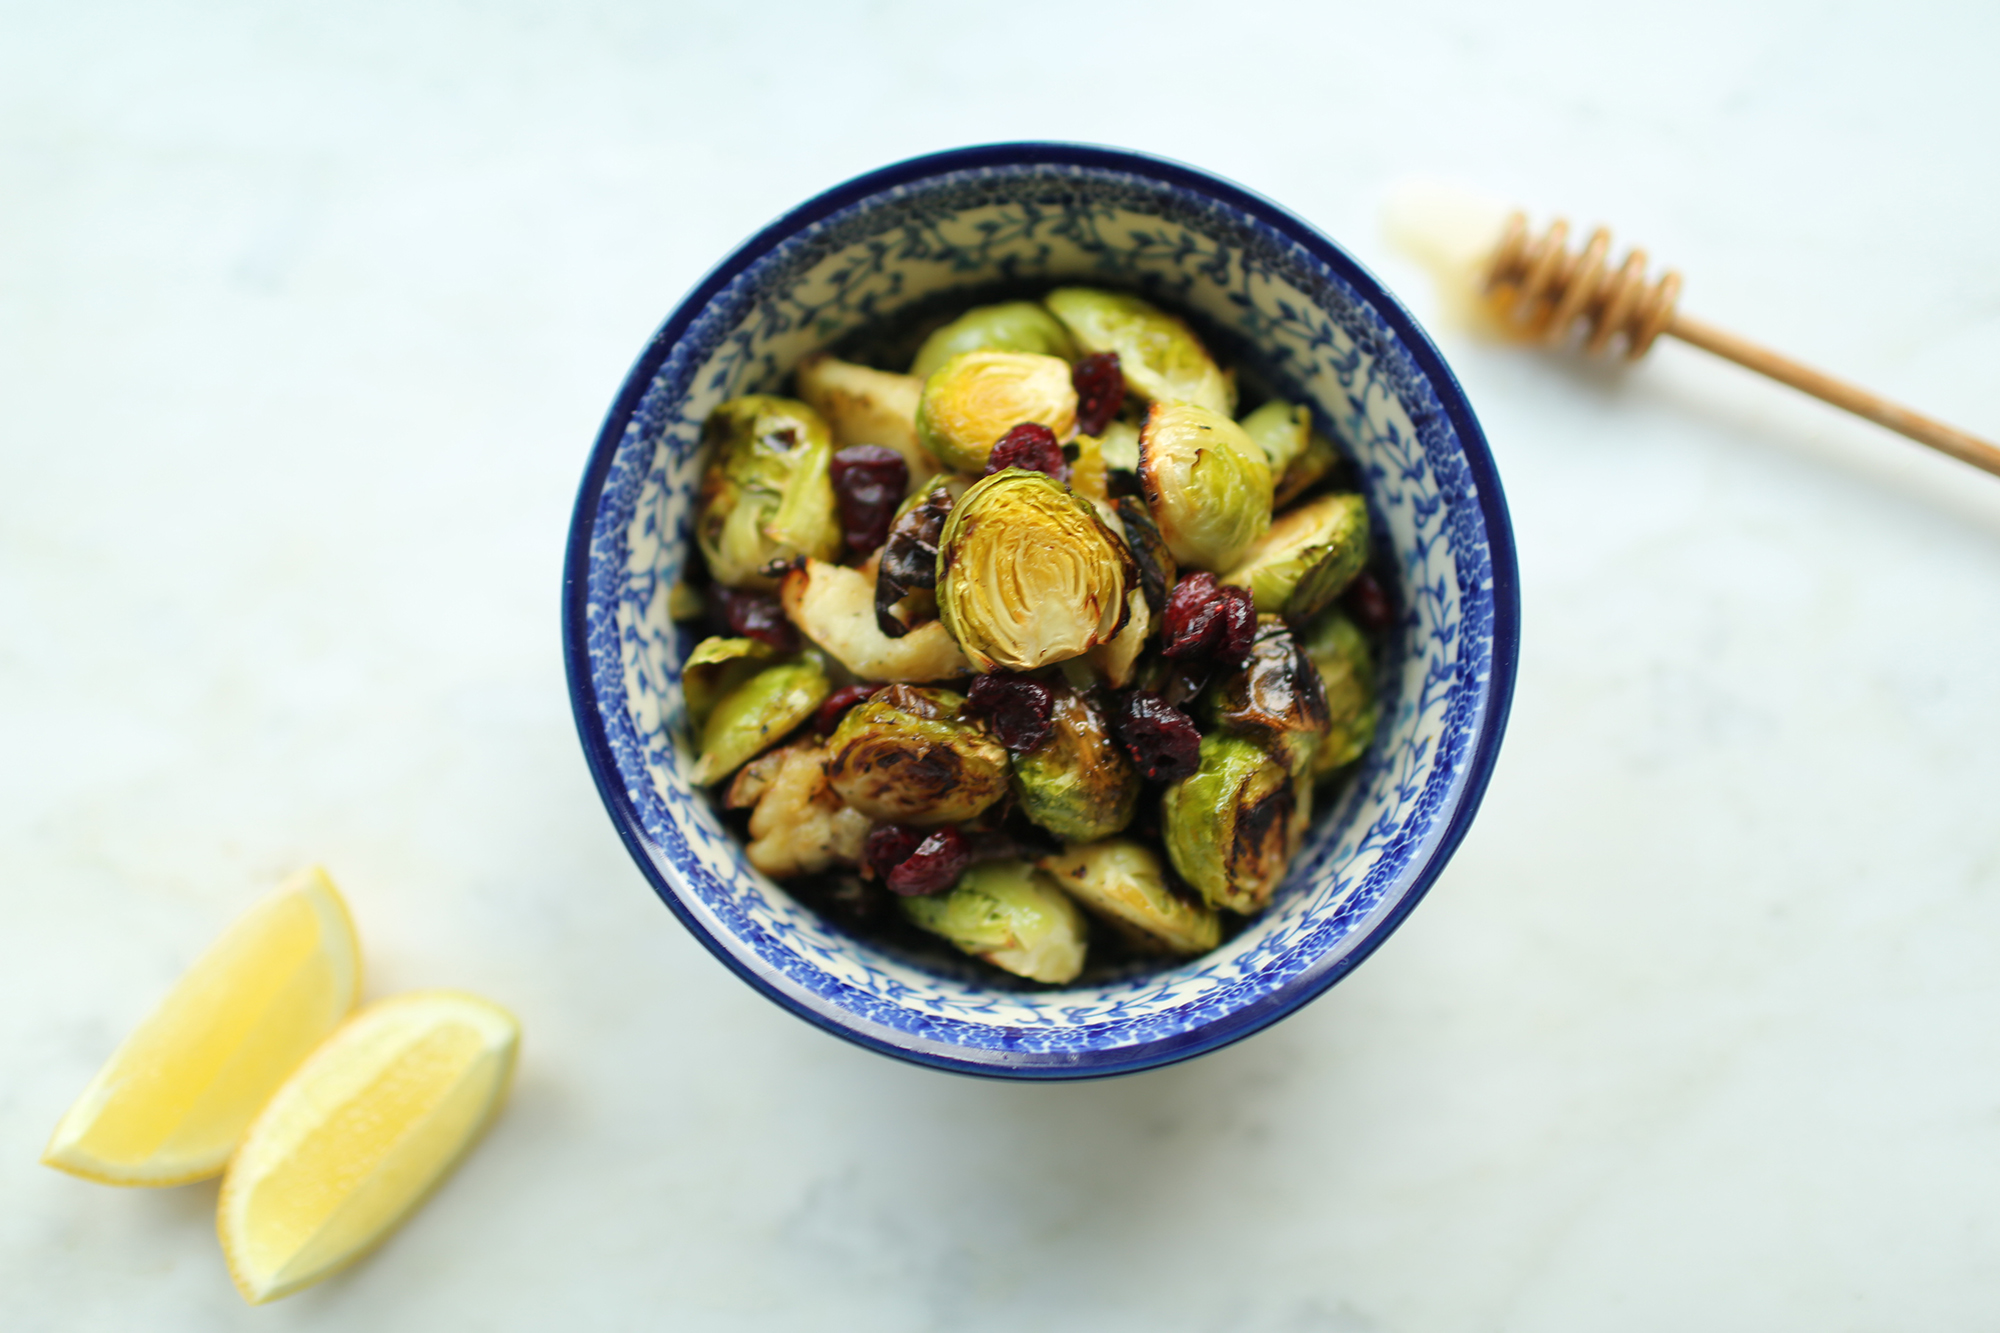 PHOTO: "The Seasoned Life" cookbook author Ayesha Curry shared her recipes for Roasted Pear and Cranberry Brussels Sprouts for your Thanksgiving meal.